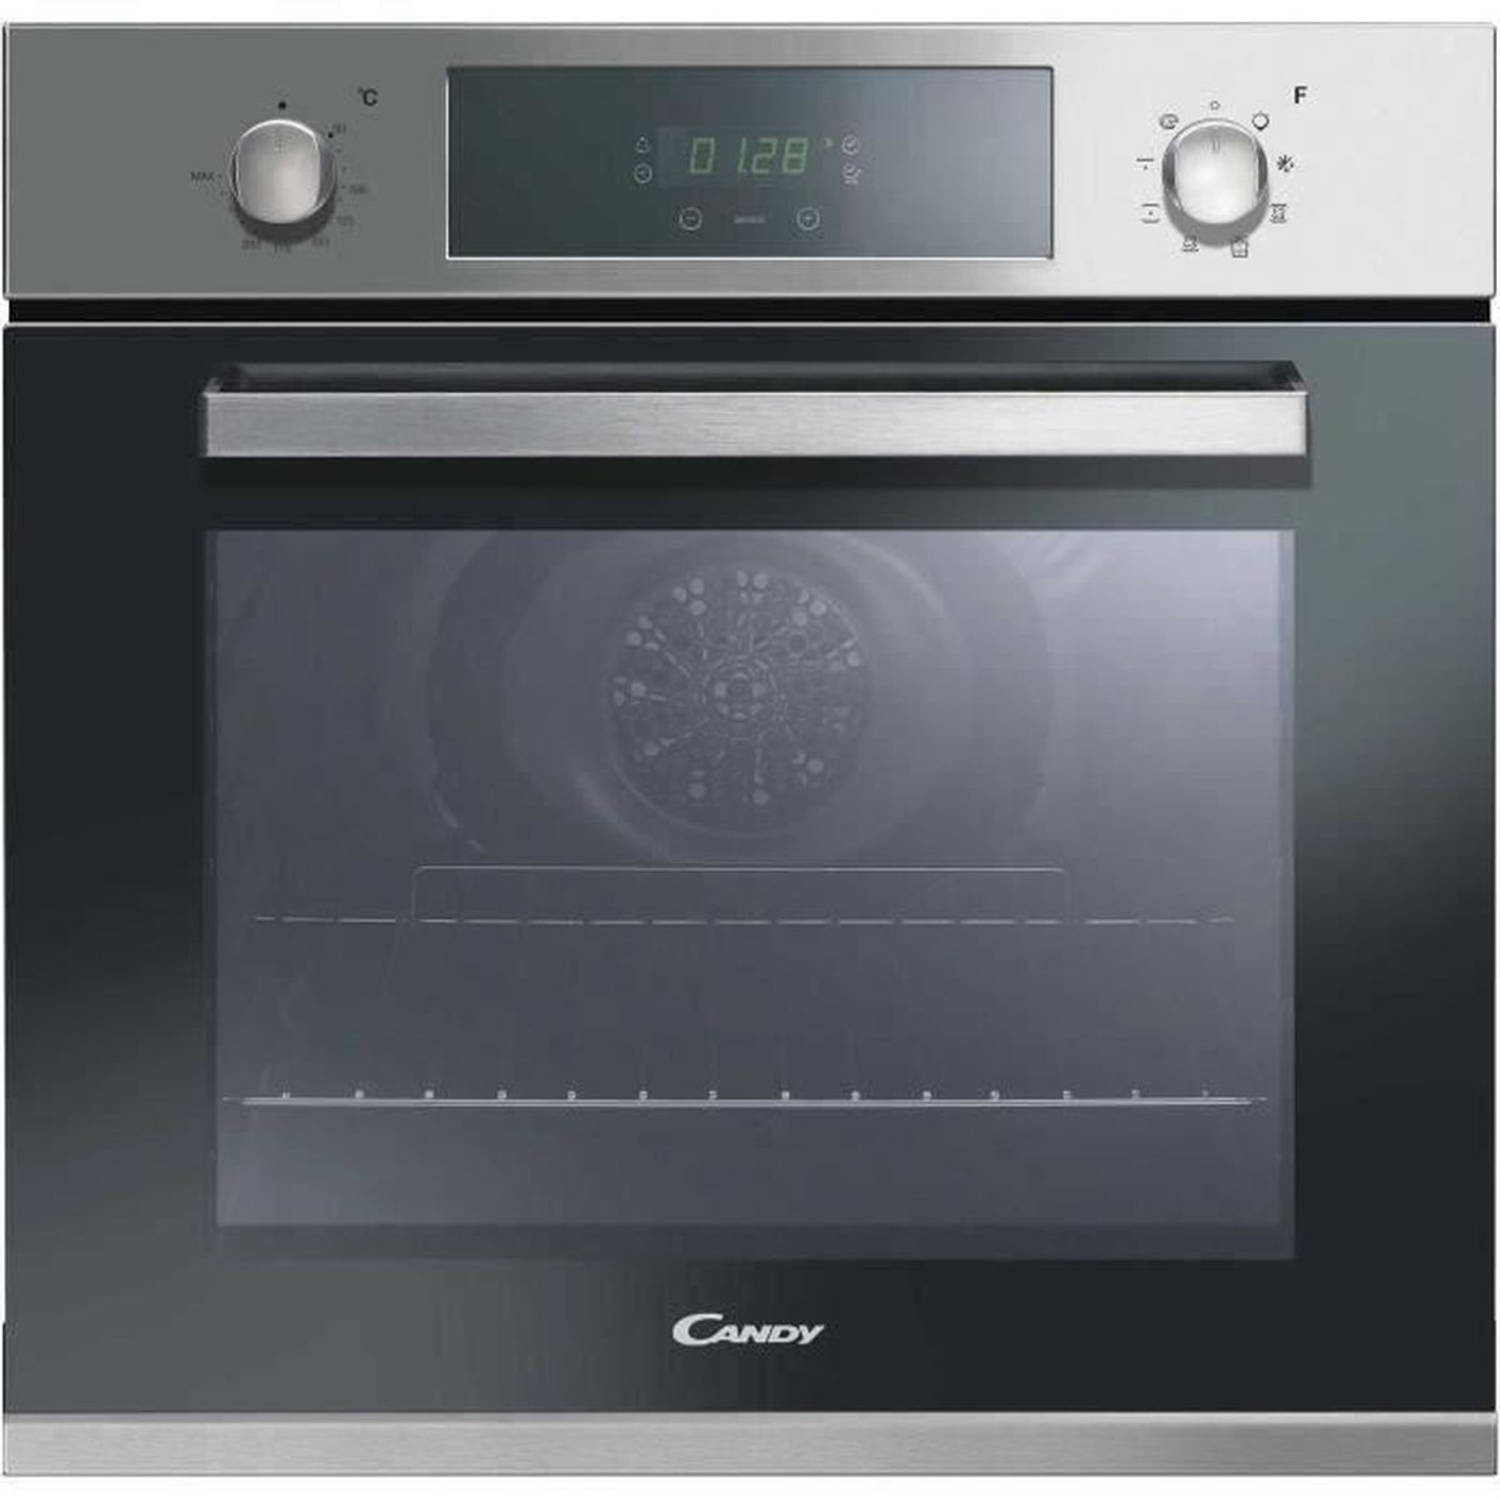 Inbouw pyrolyse oven CANDY FCP616X/E - RVS - 60x60x57 cm